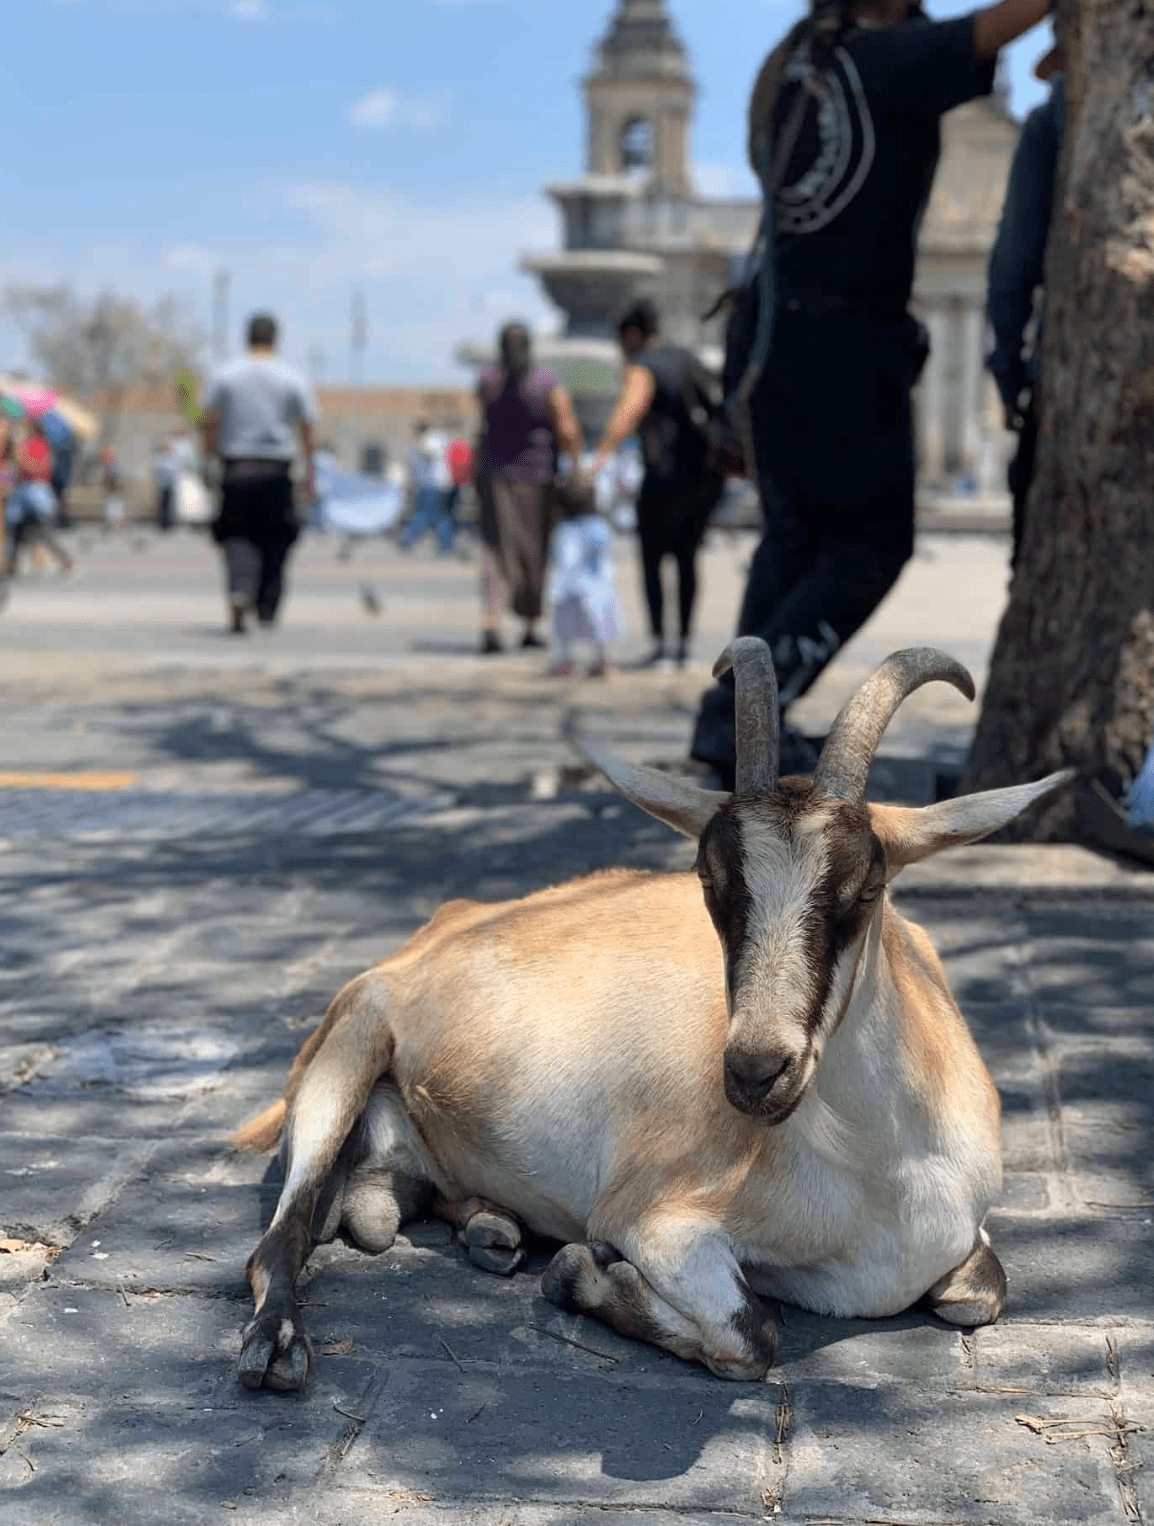 Goat's milk is a local delicacy. This goat is resting on the charming cobblestone streets.